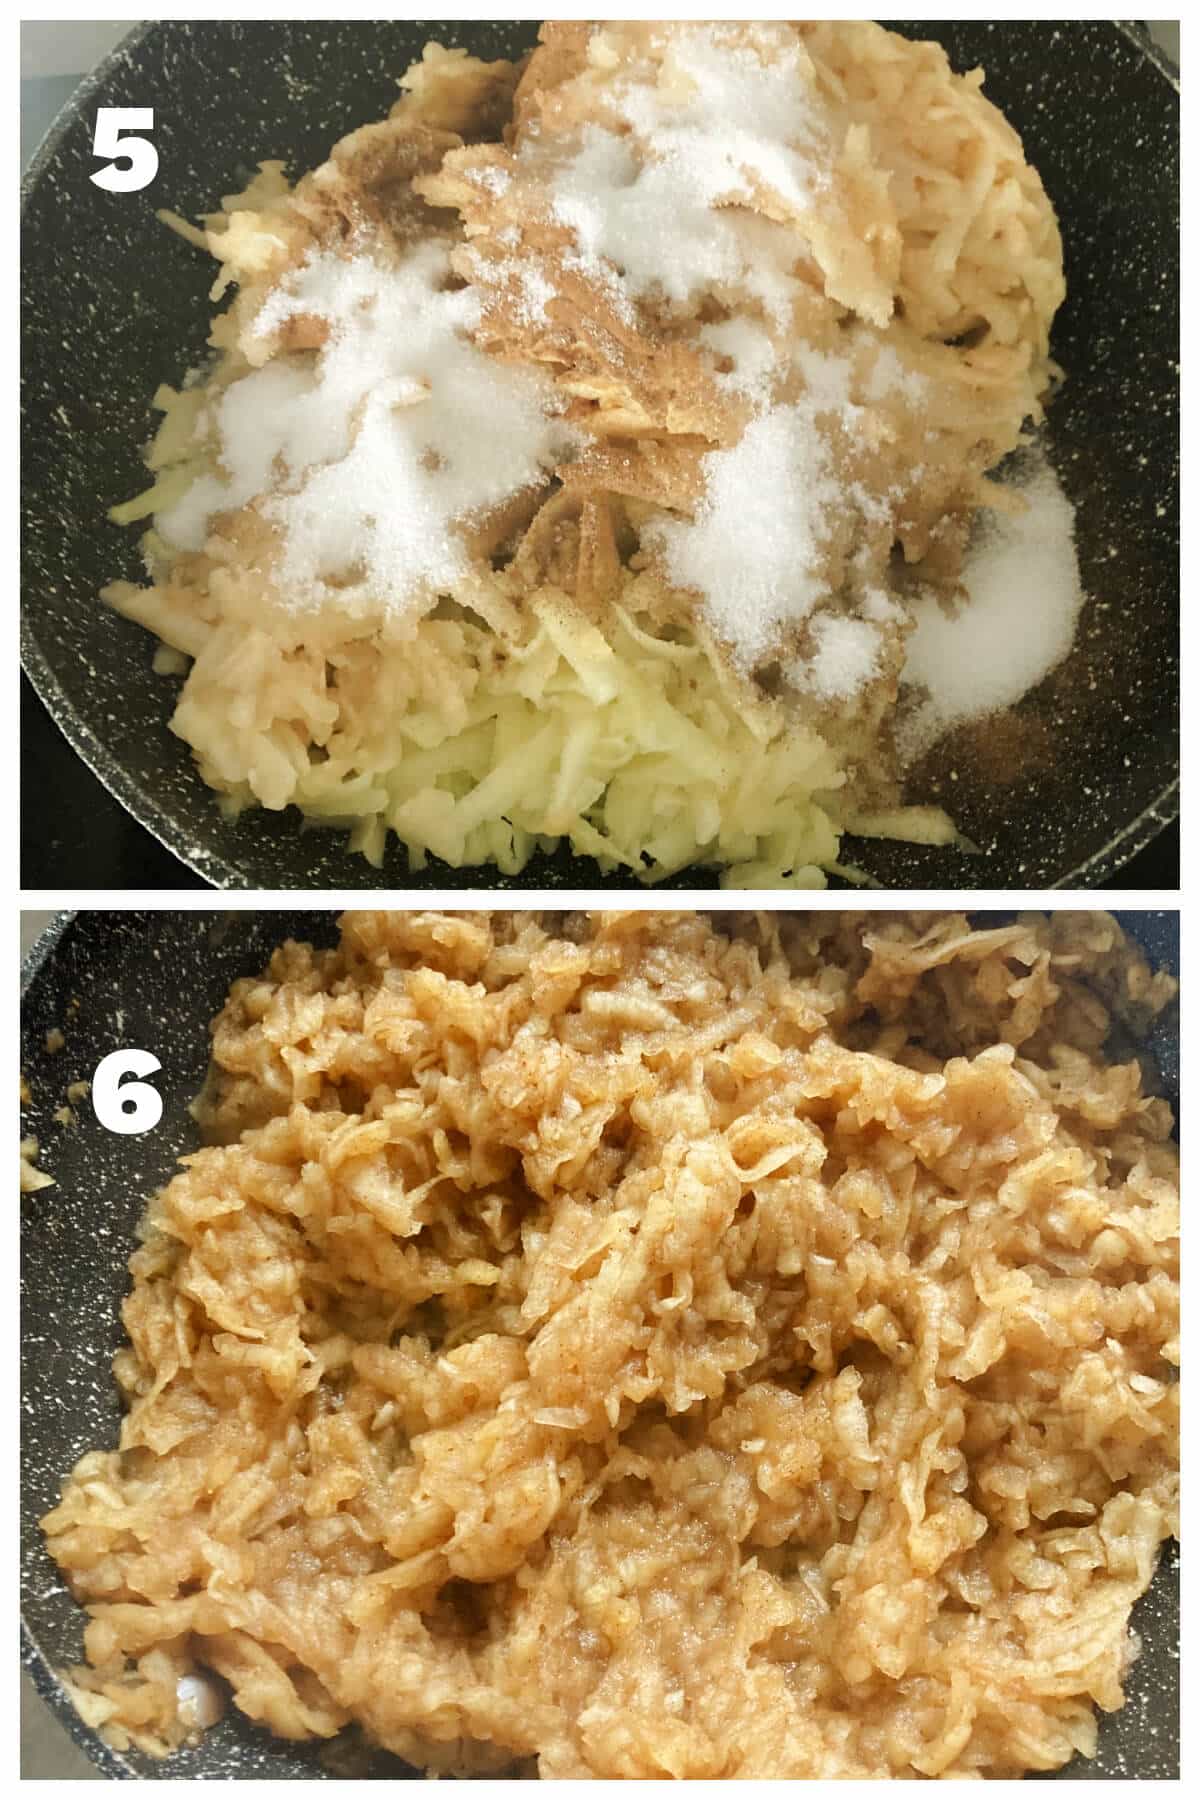 Collage of 2 photos to show how to make apple pie filling